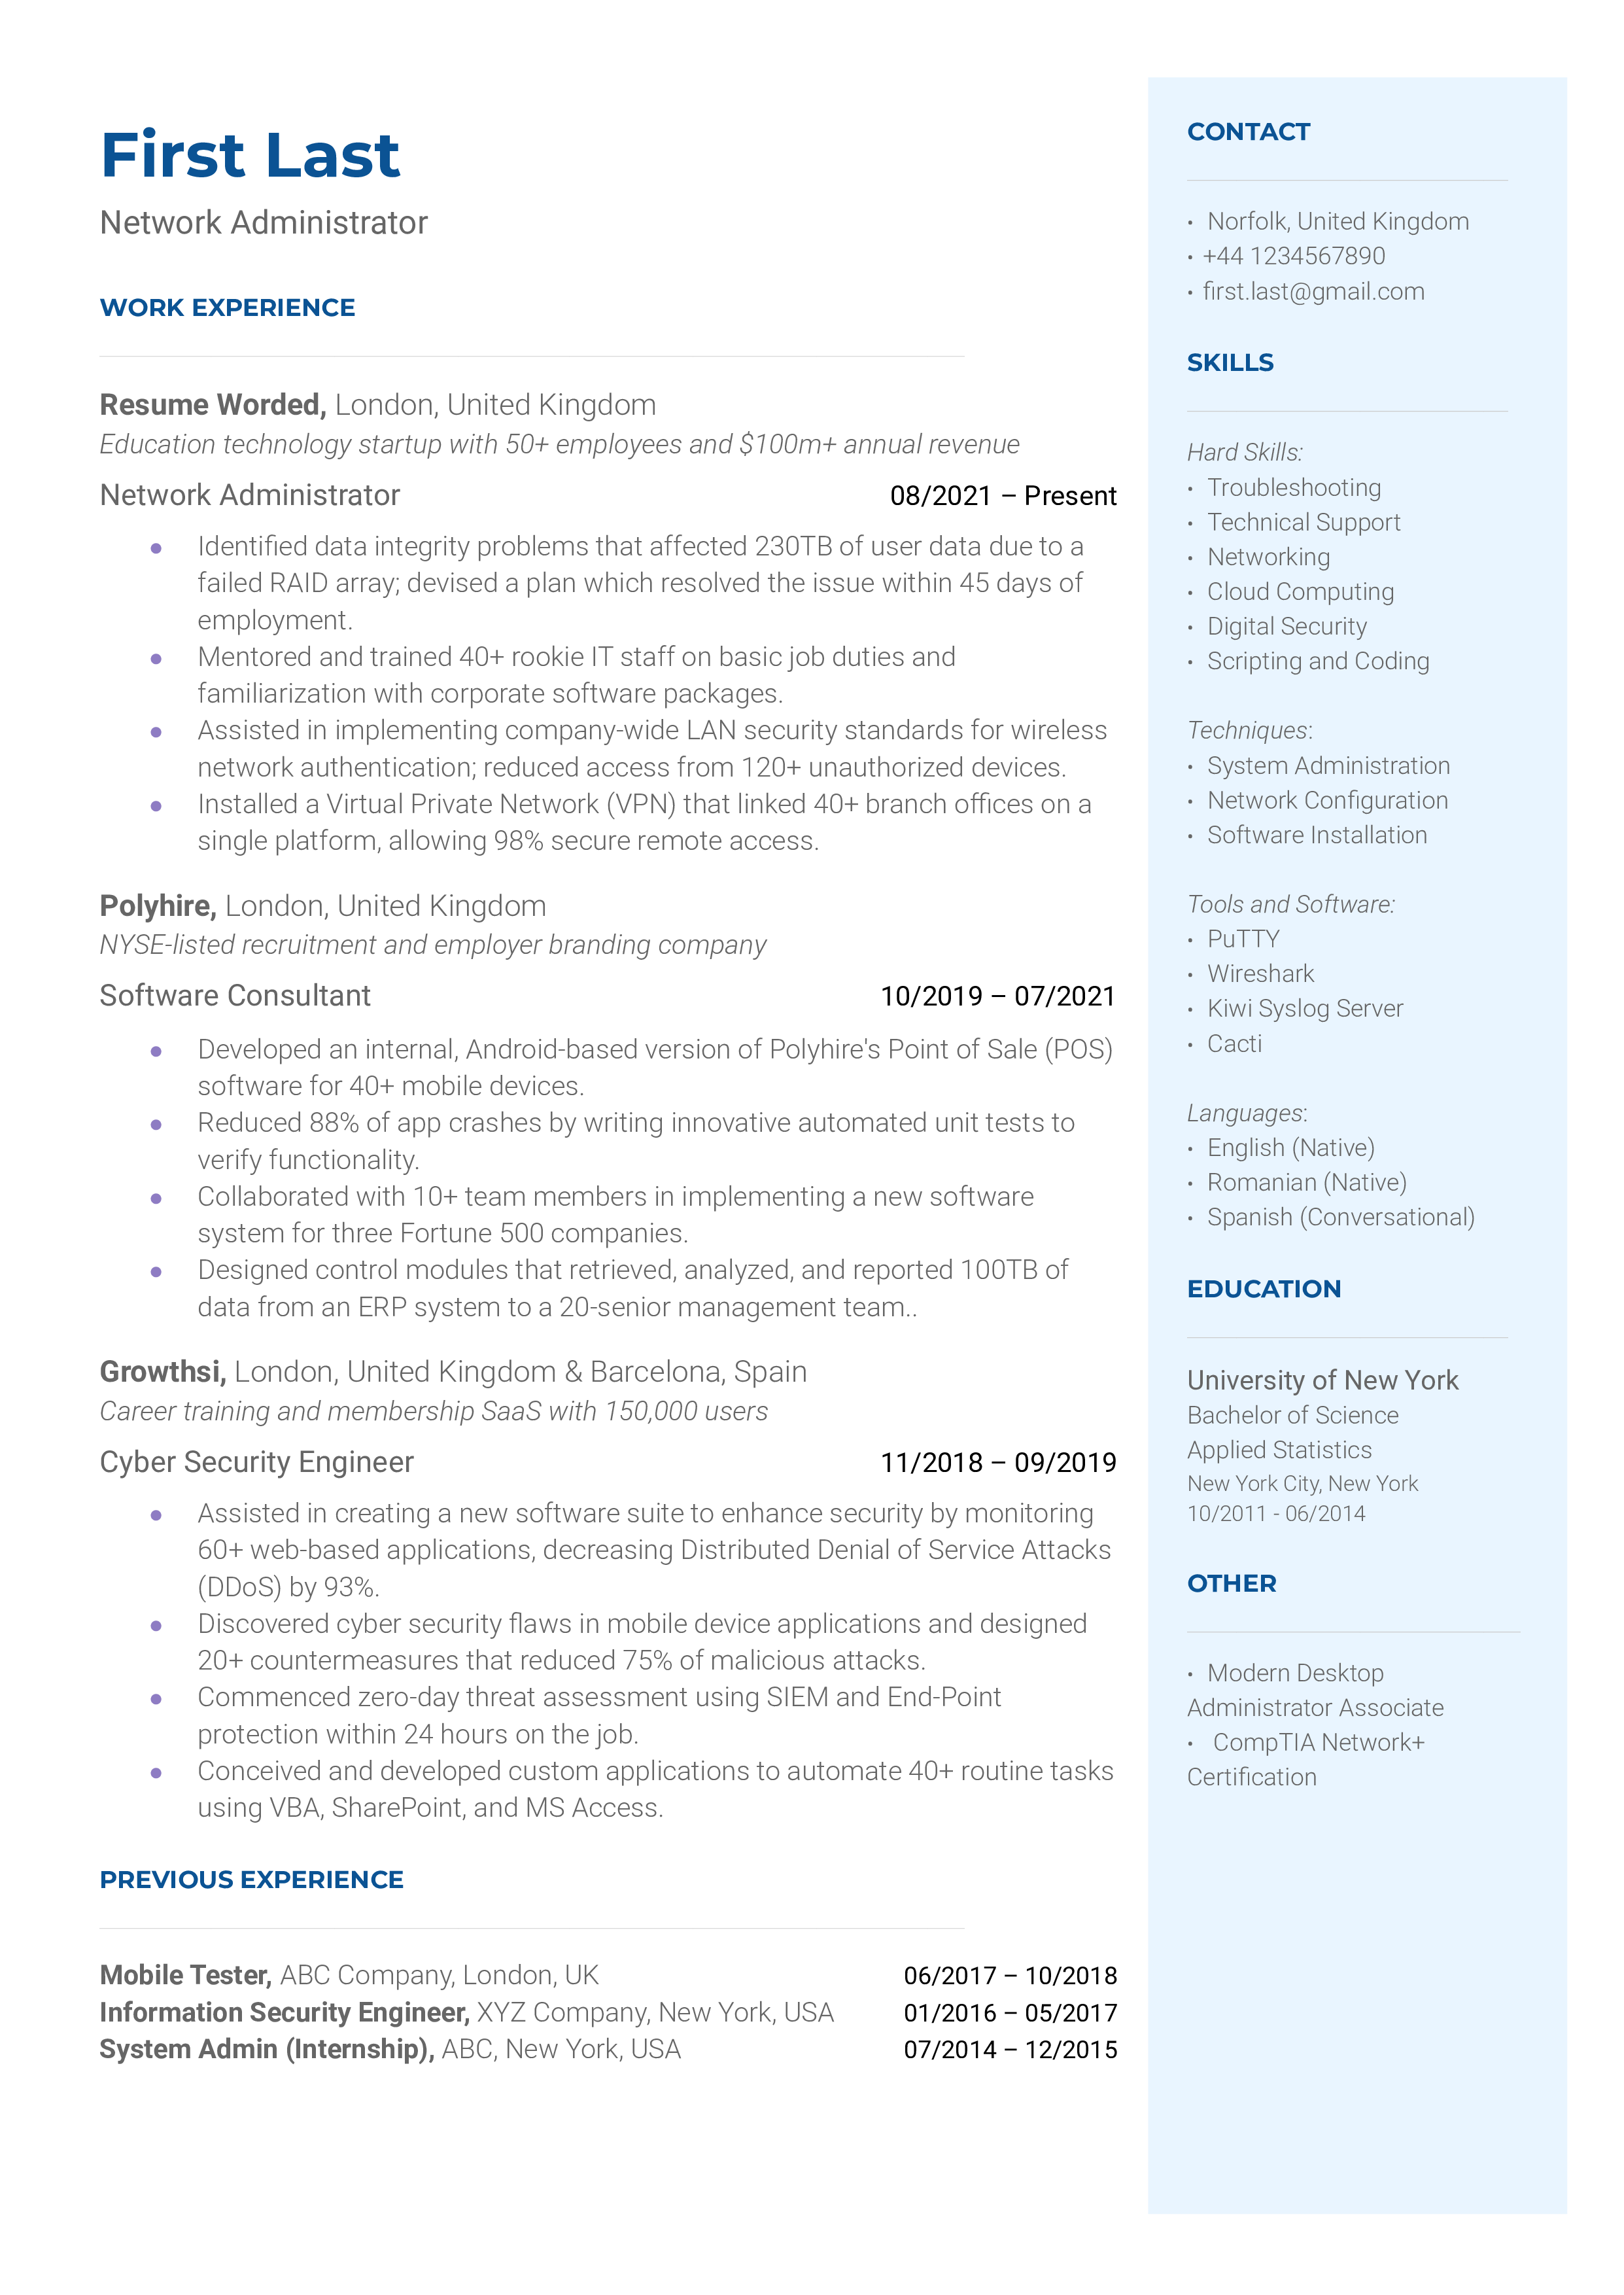 An example of a Network Administrator resume showcasing technical skills and project-based accomplishments.